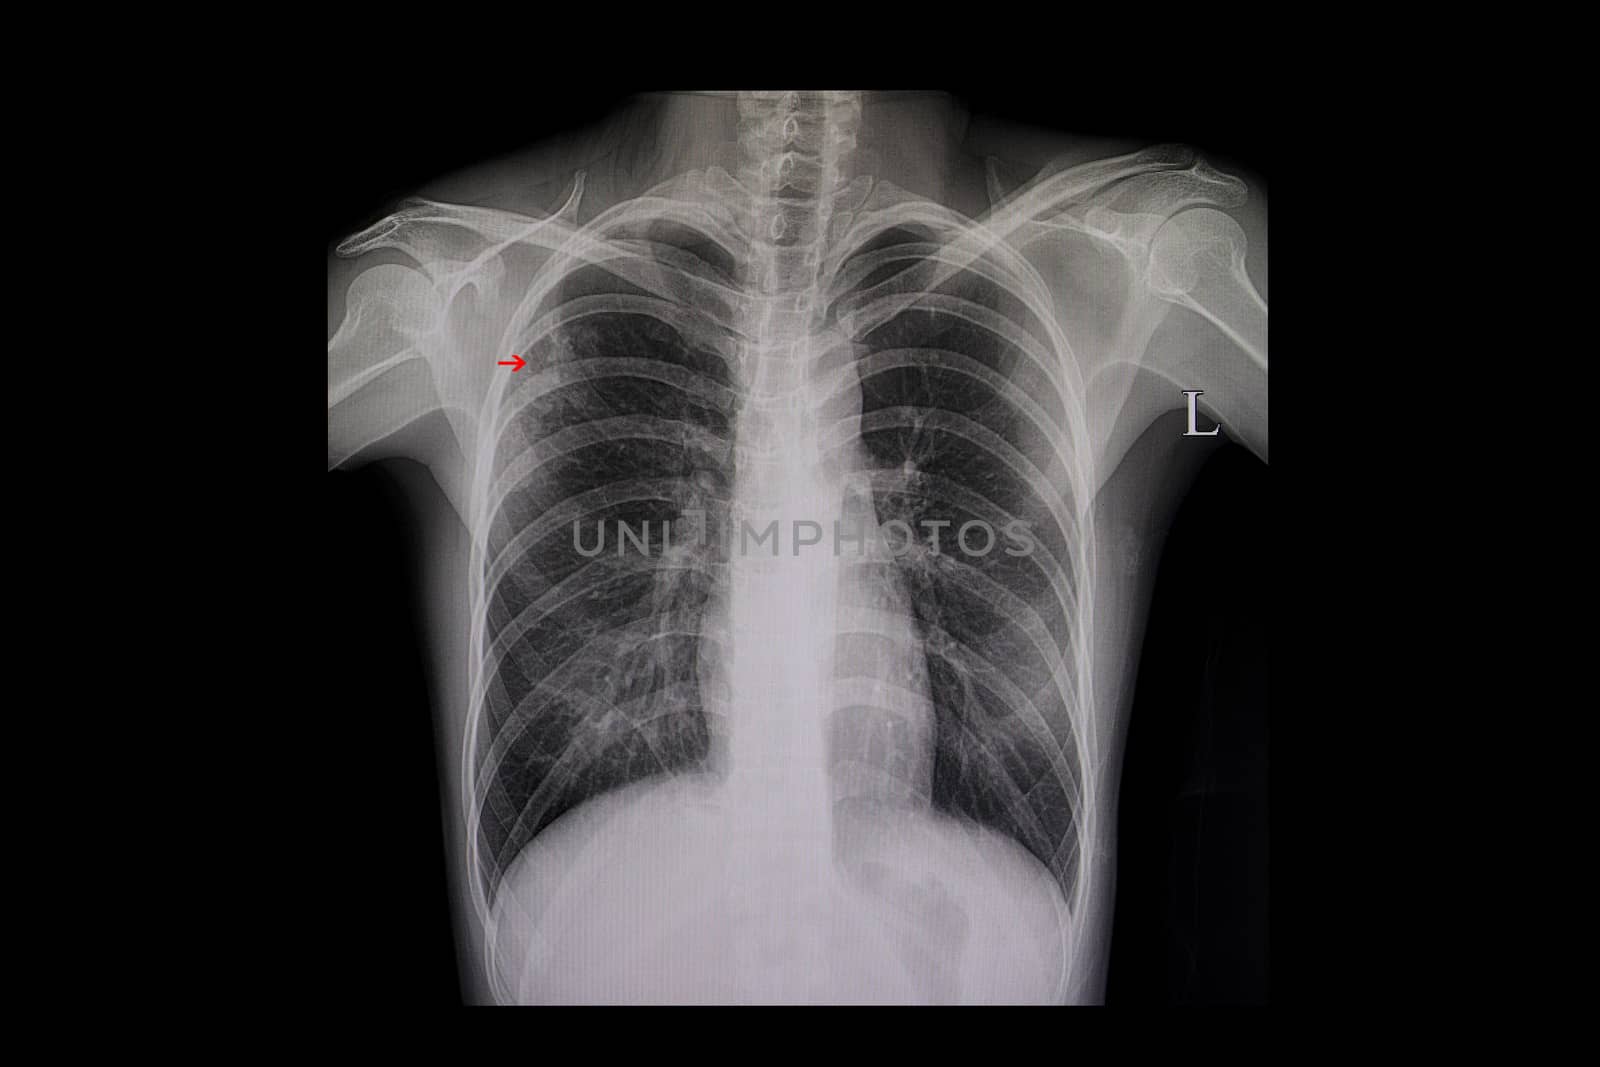 Xray film of a patient with active pulmonary tuberculosis in the right upper lung (red arrow).